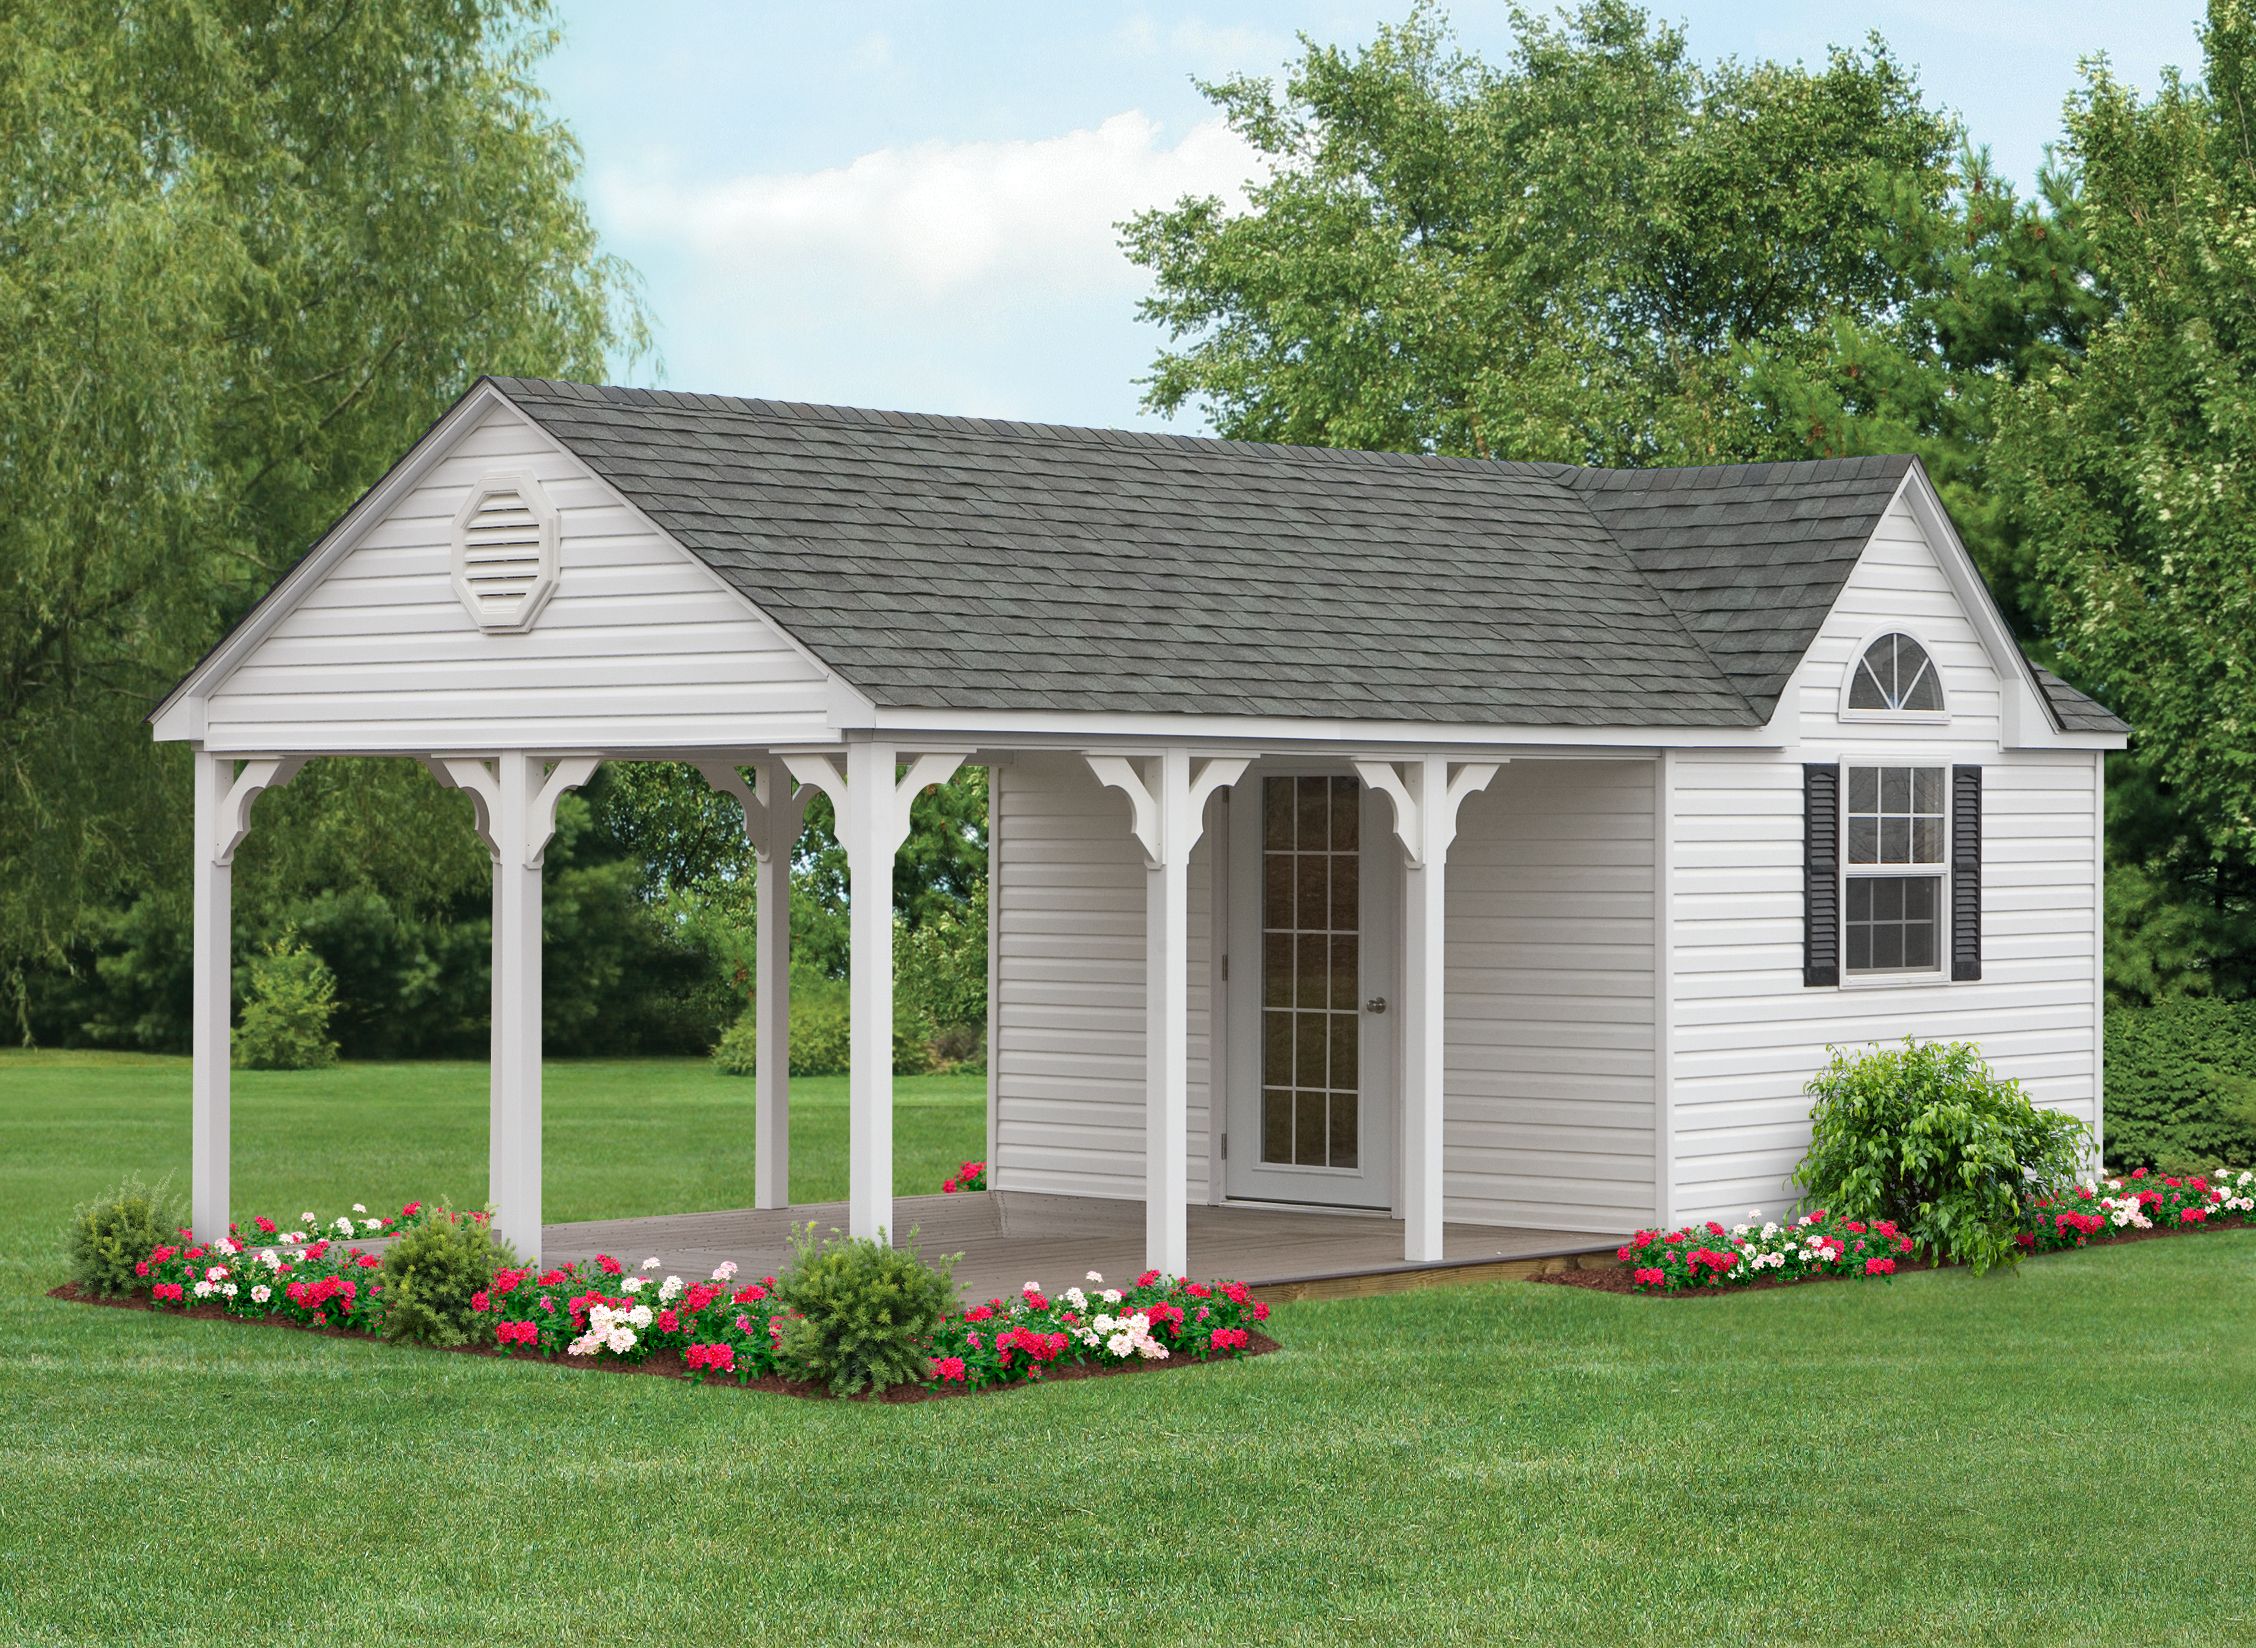 Cabins for Pond View Mini Structures in  Strasburg, PA